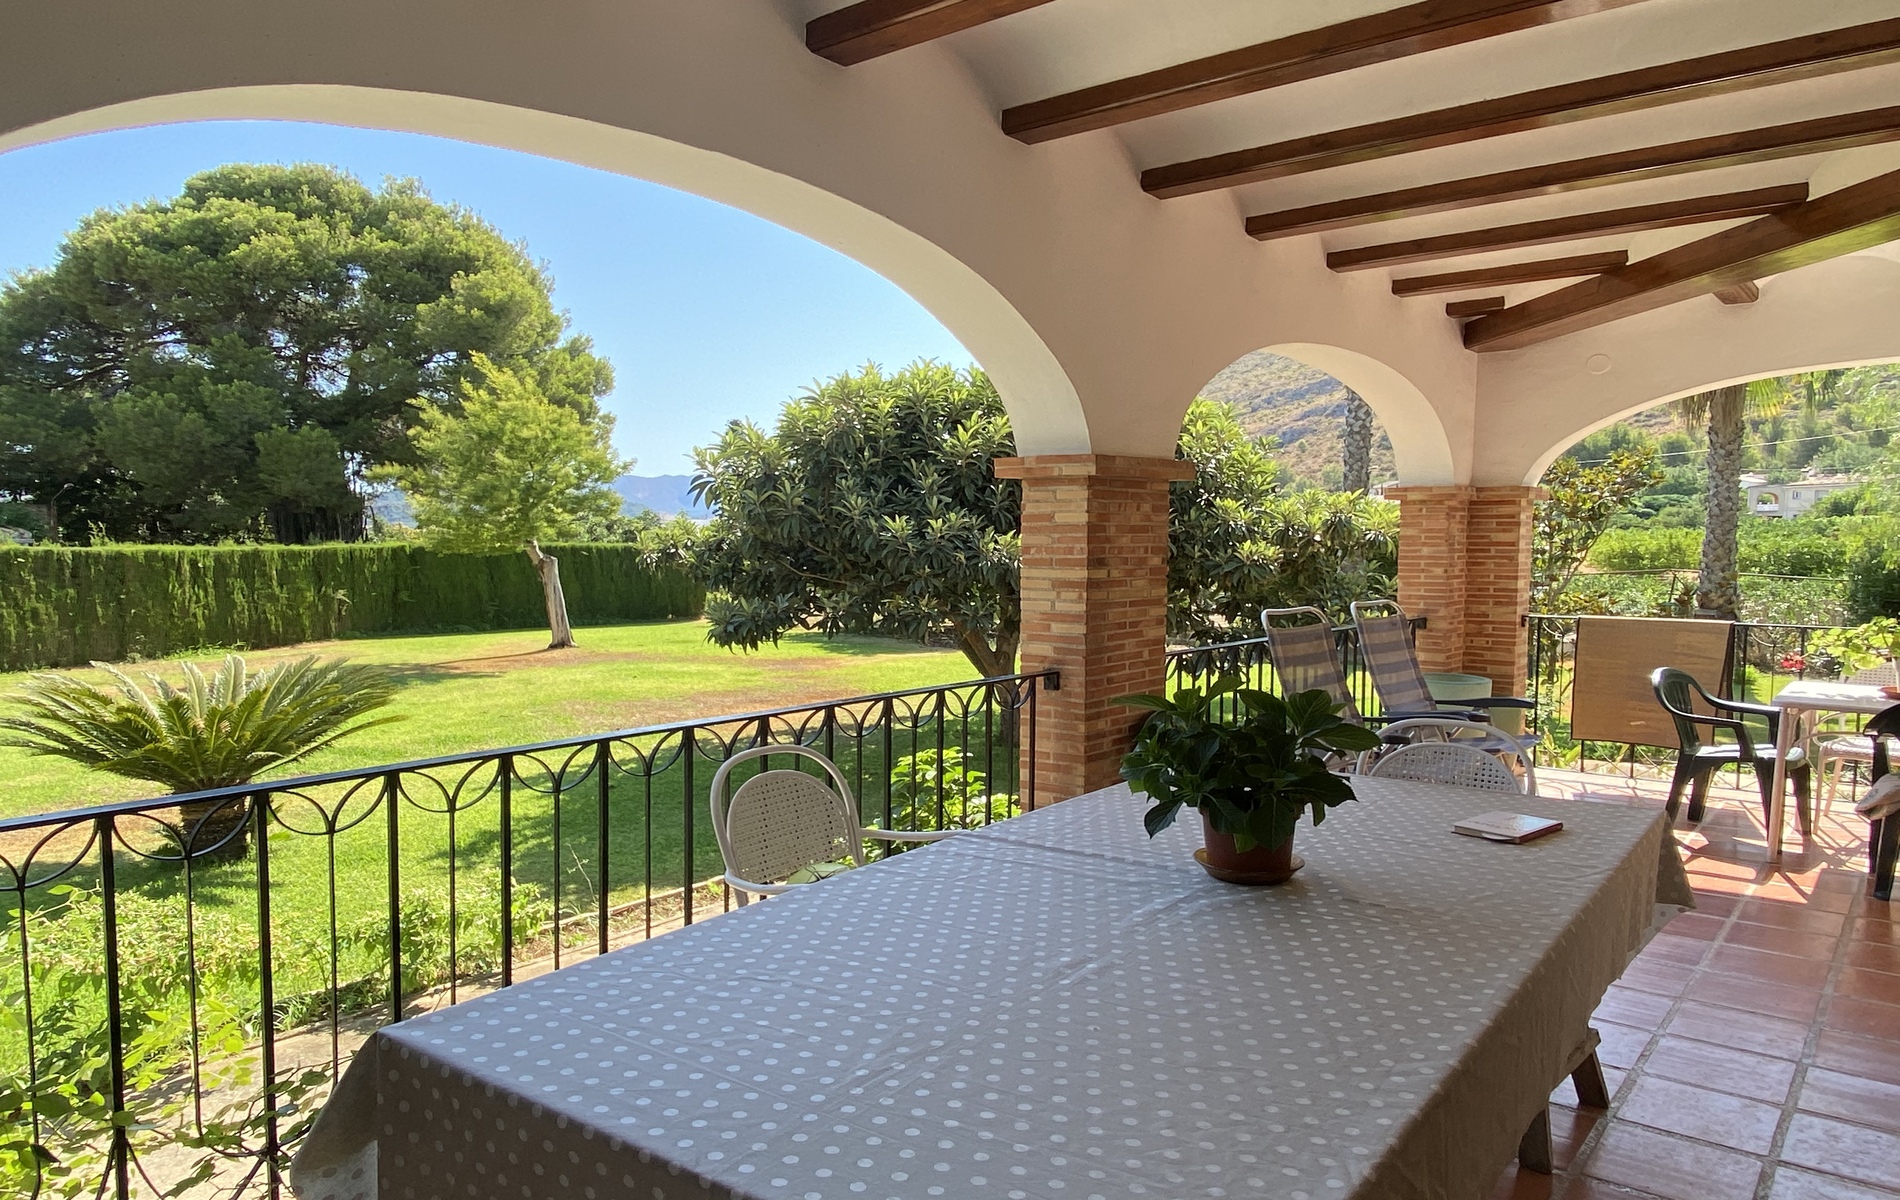 TRADITIONAL STYLE VILLA JUST 10 KM FROM DENIA